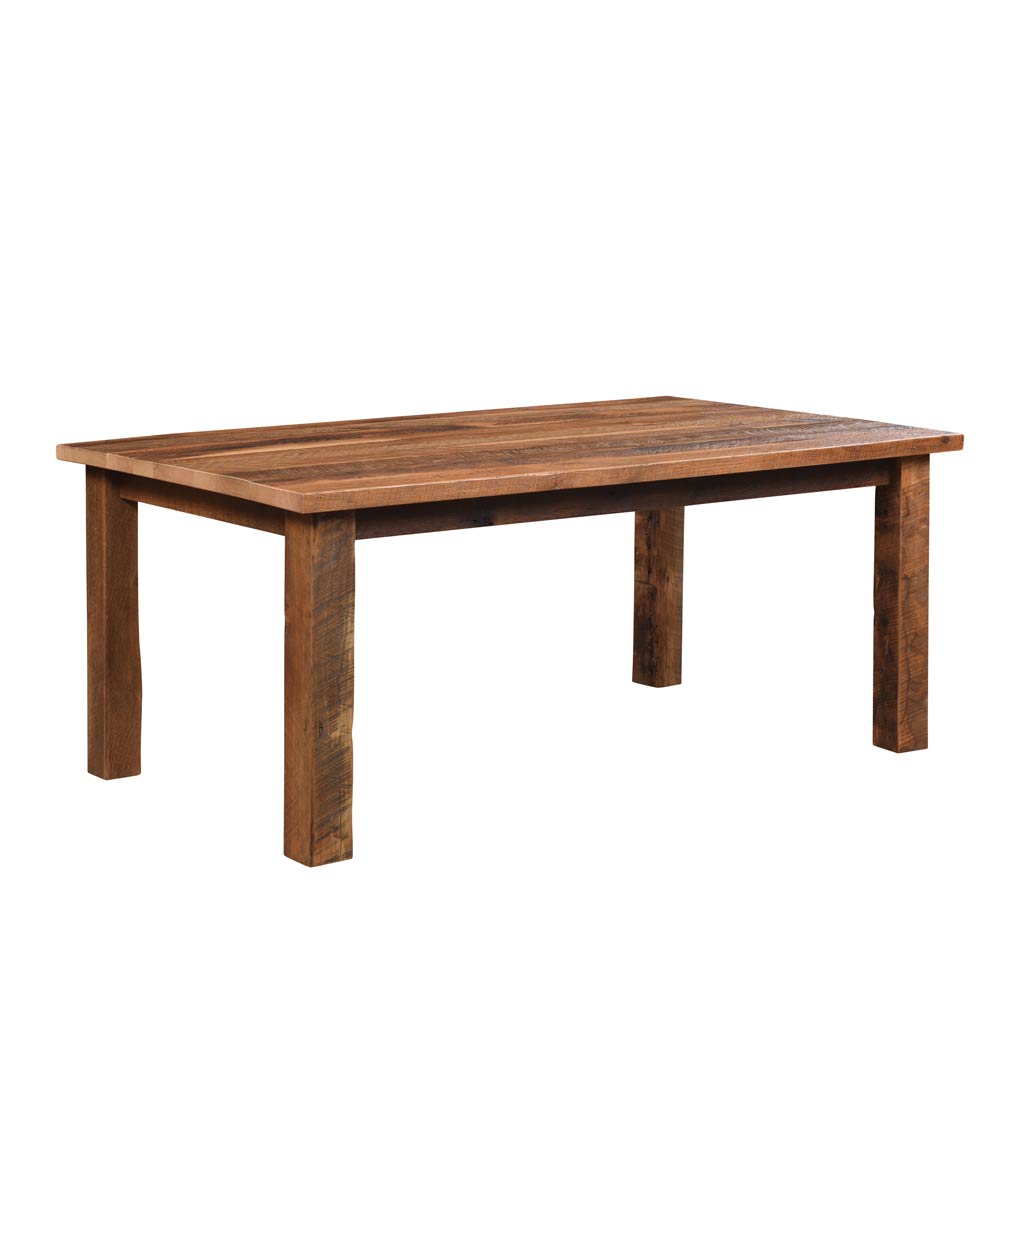 Almanzo Barnwood Sofa Table from DutchCrafters Amish Furniture